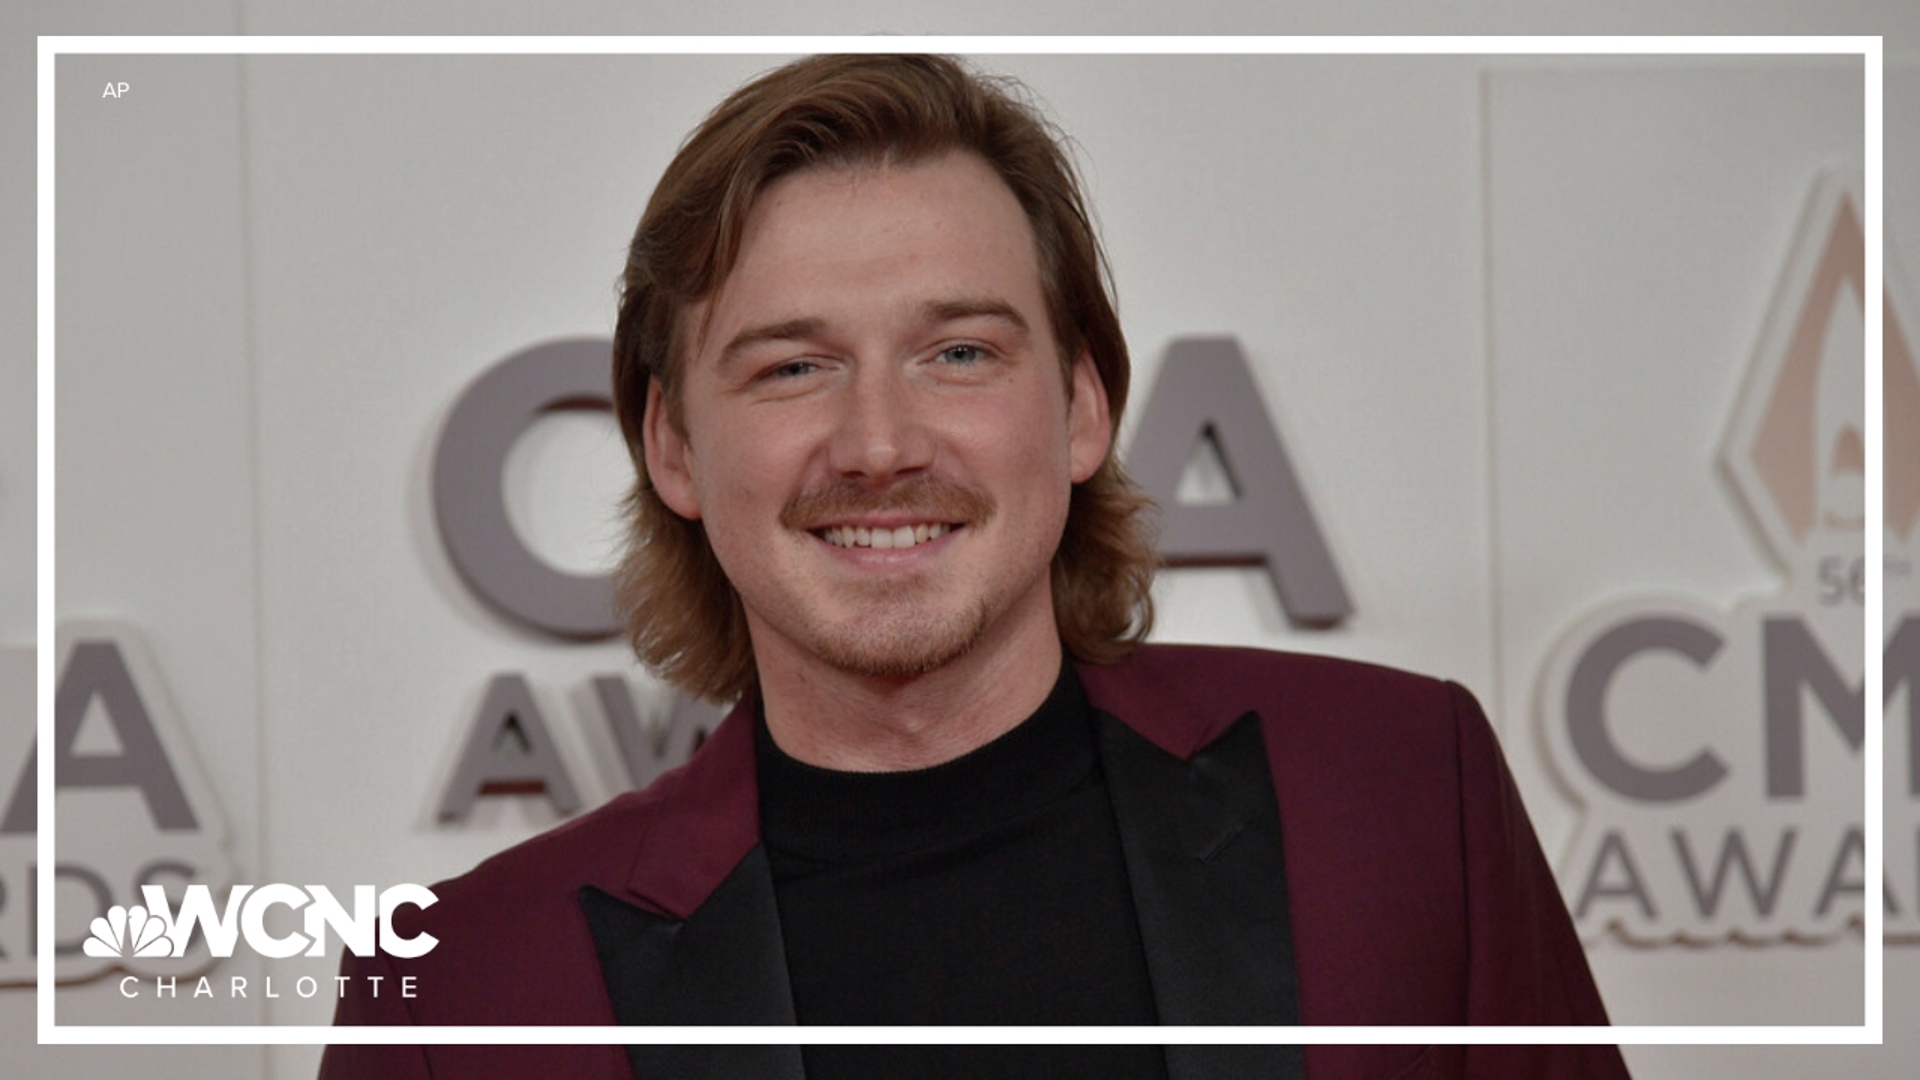 Fans hoping to see morgan wallen next week will have to wait a bit longer. The country star postponing his concerts at Bank of America Stadium.